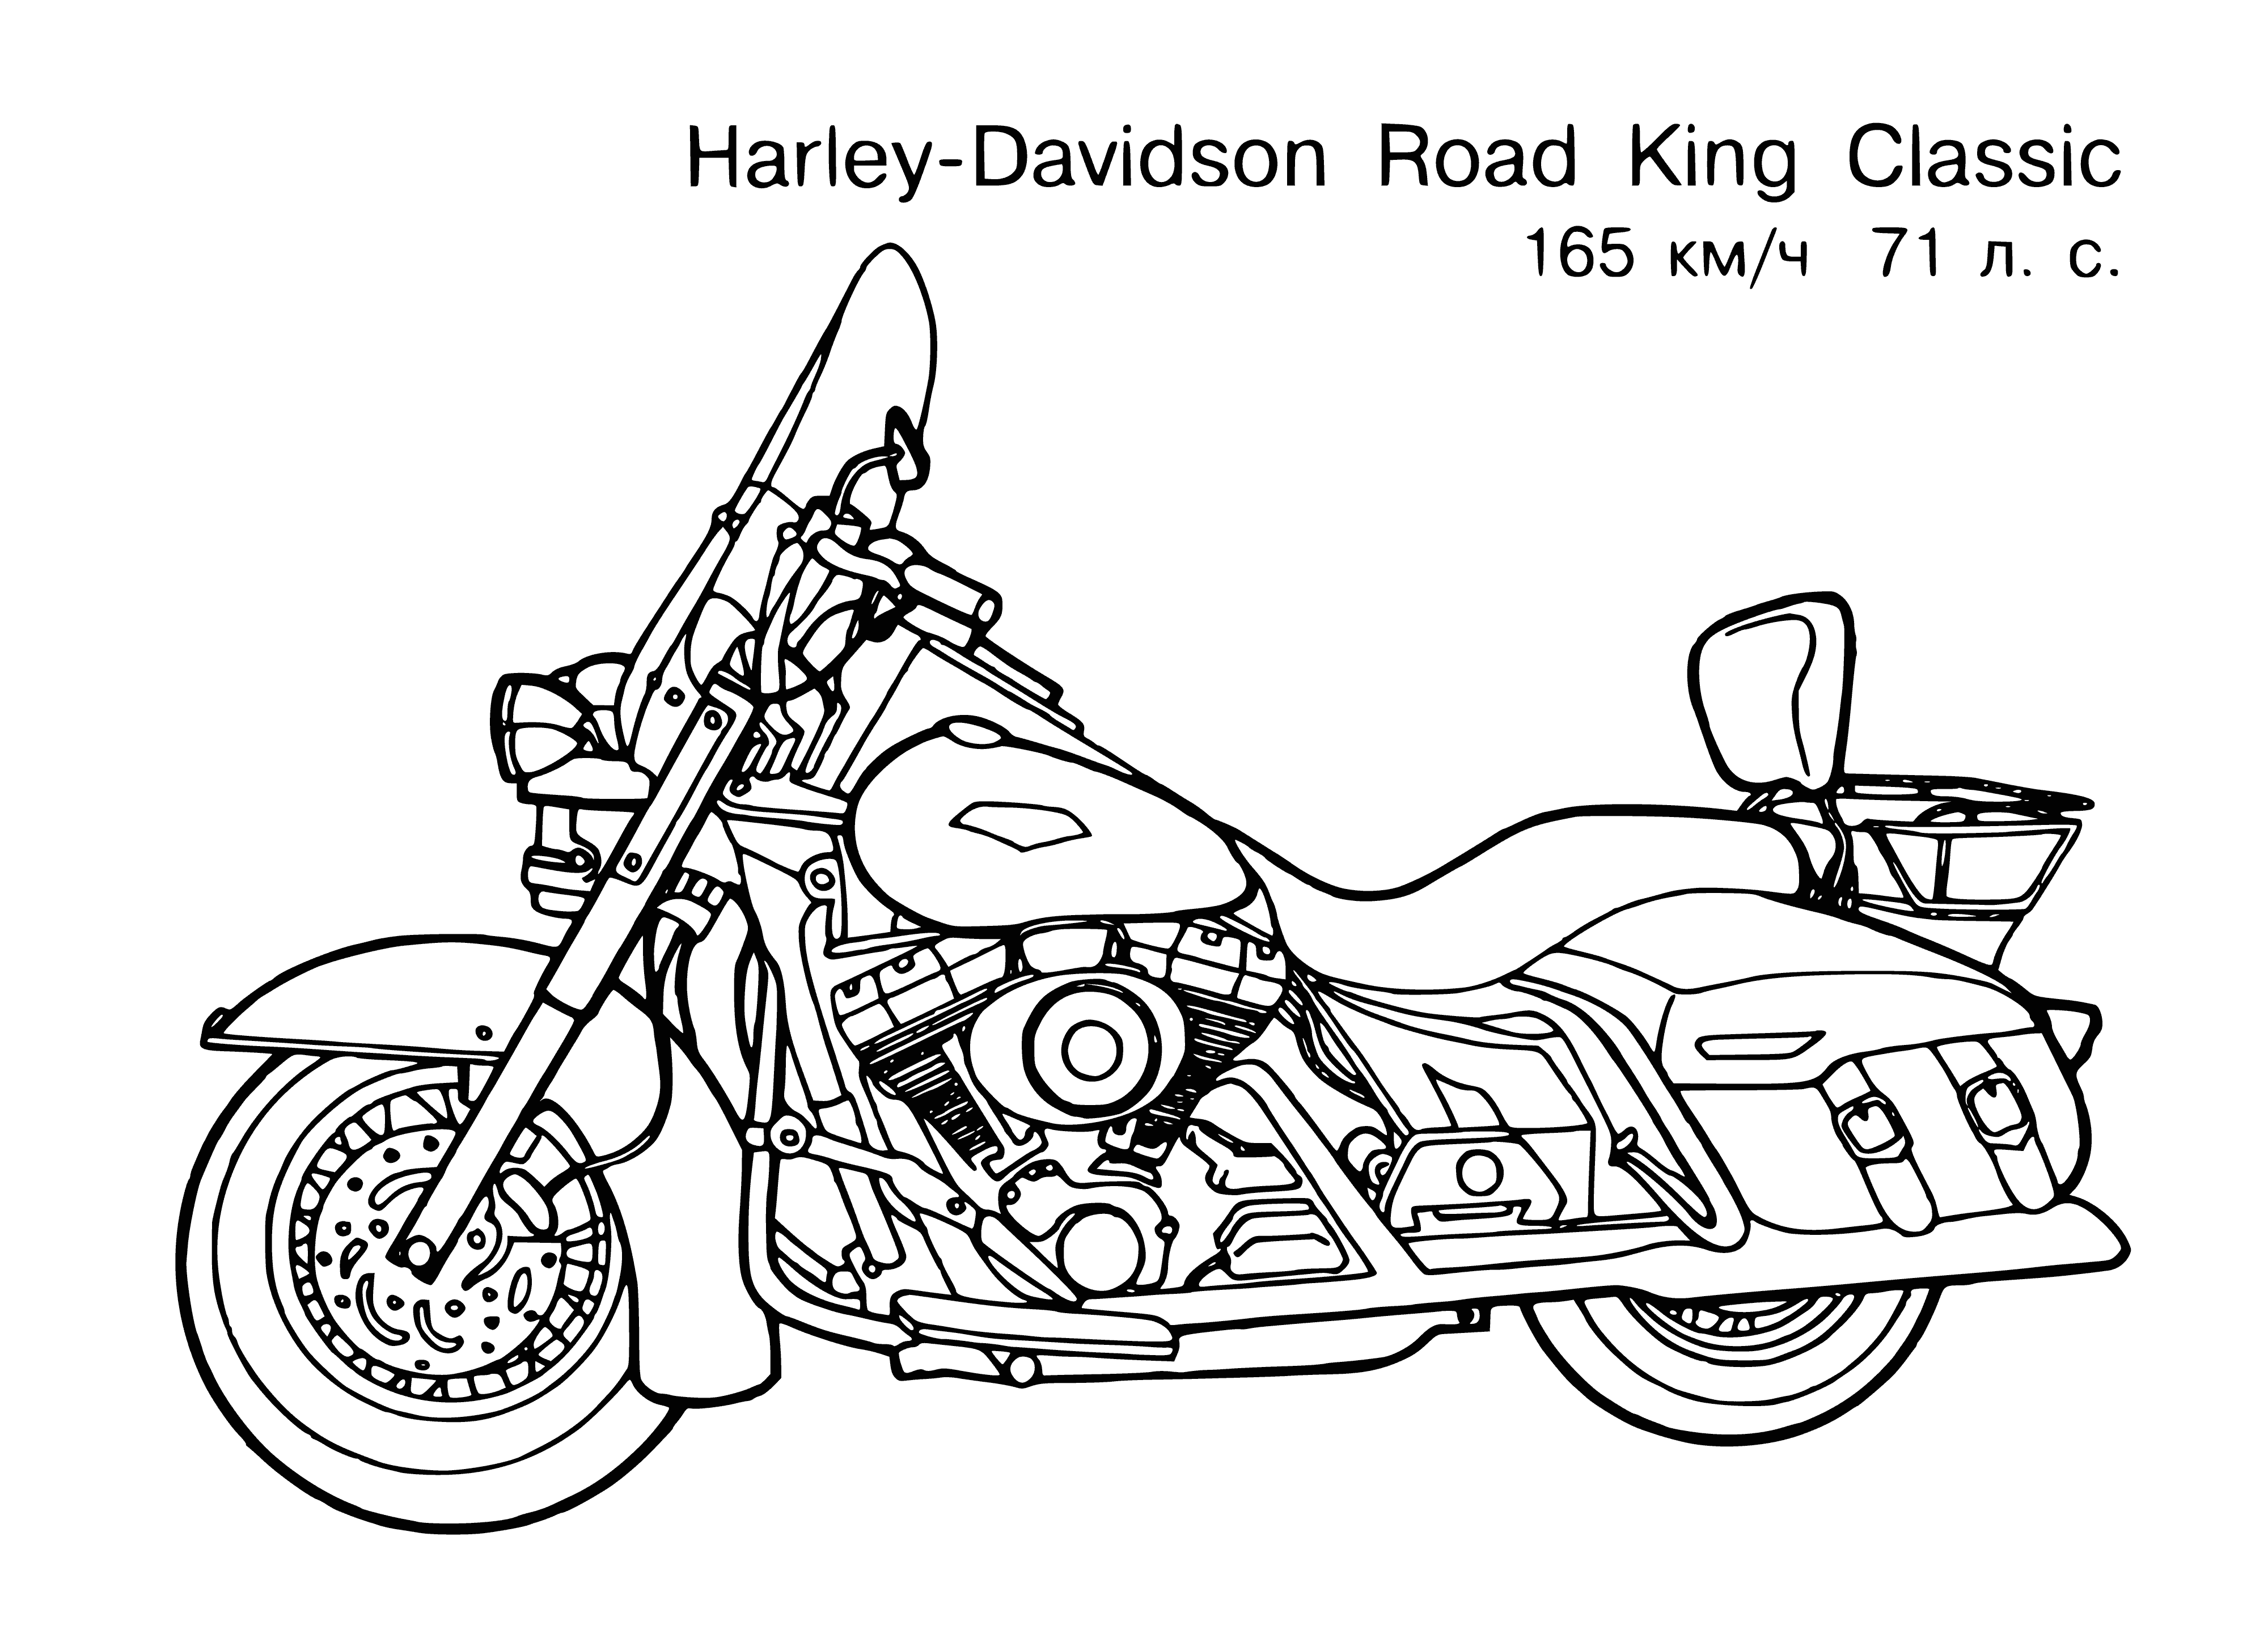 coloring page: Intimidating jet black motorcycle with yellow & red skull on tank & yellow headlights. Visible engine in metal cage. On black/yellow striped bg.